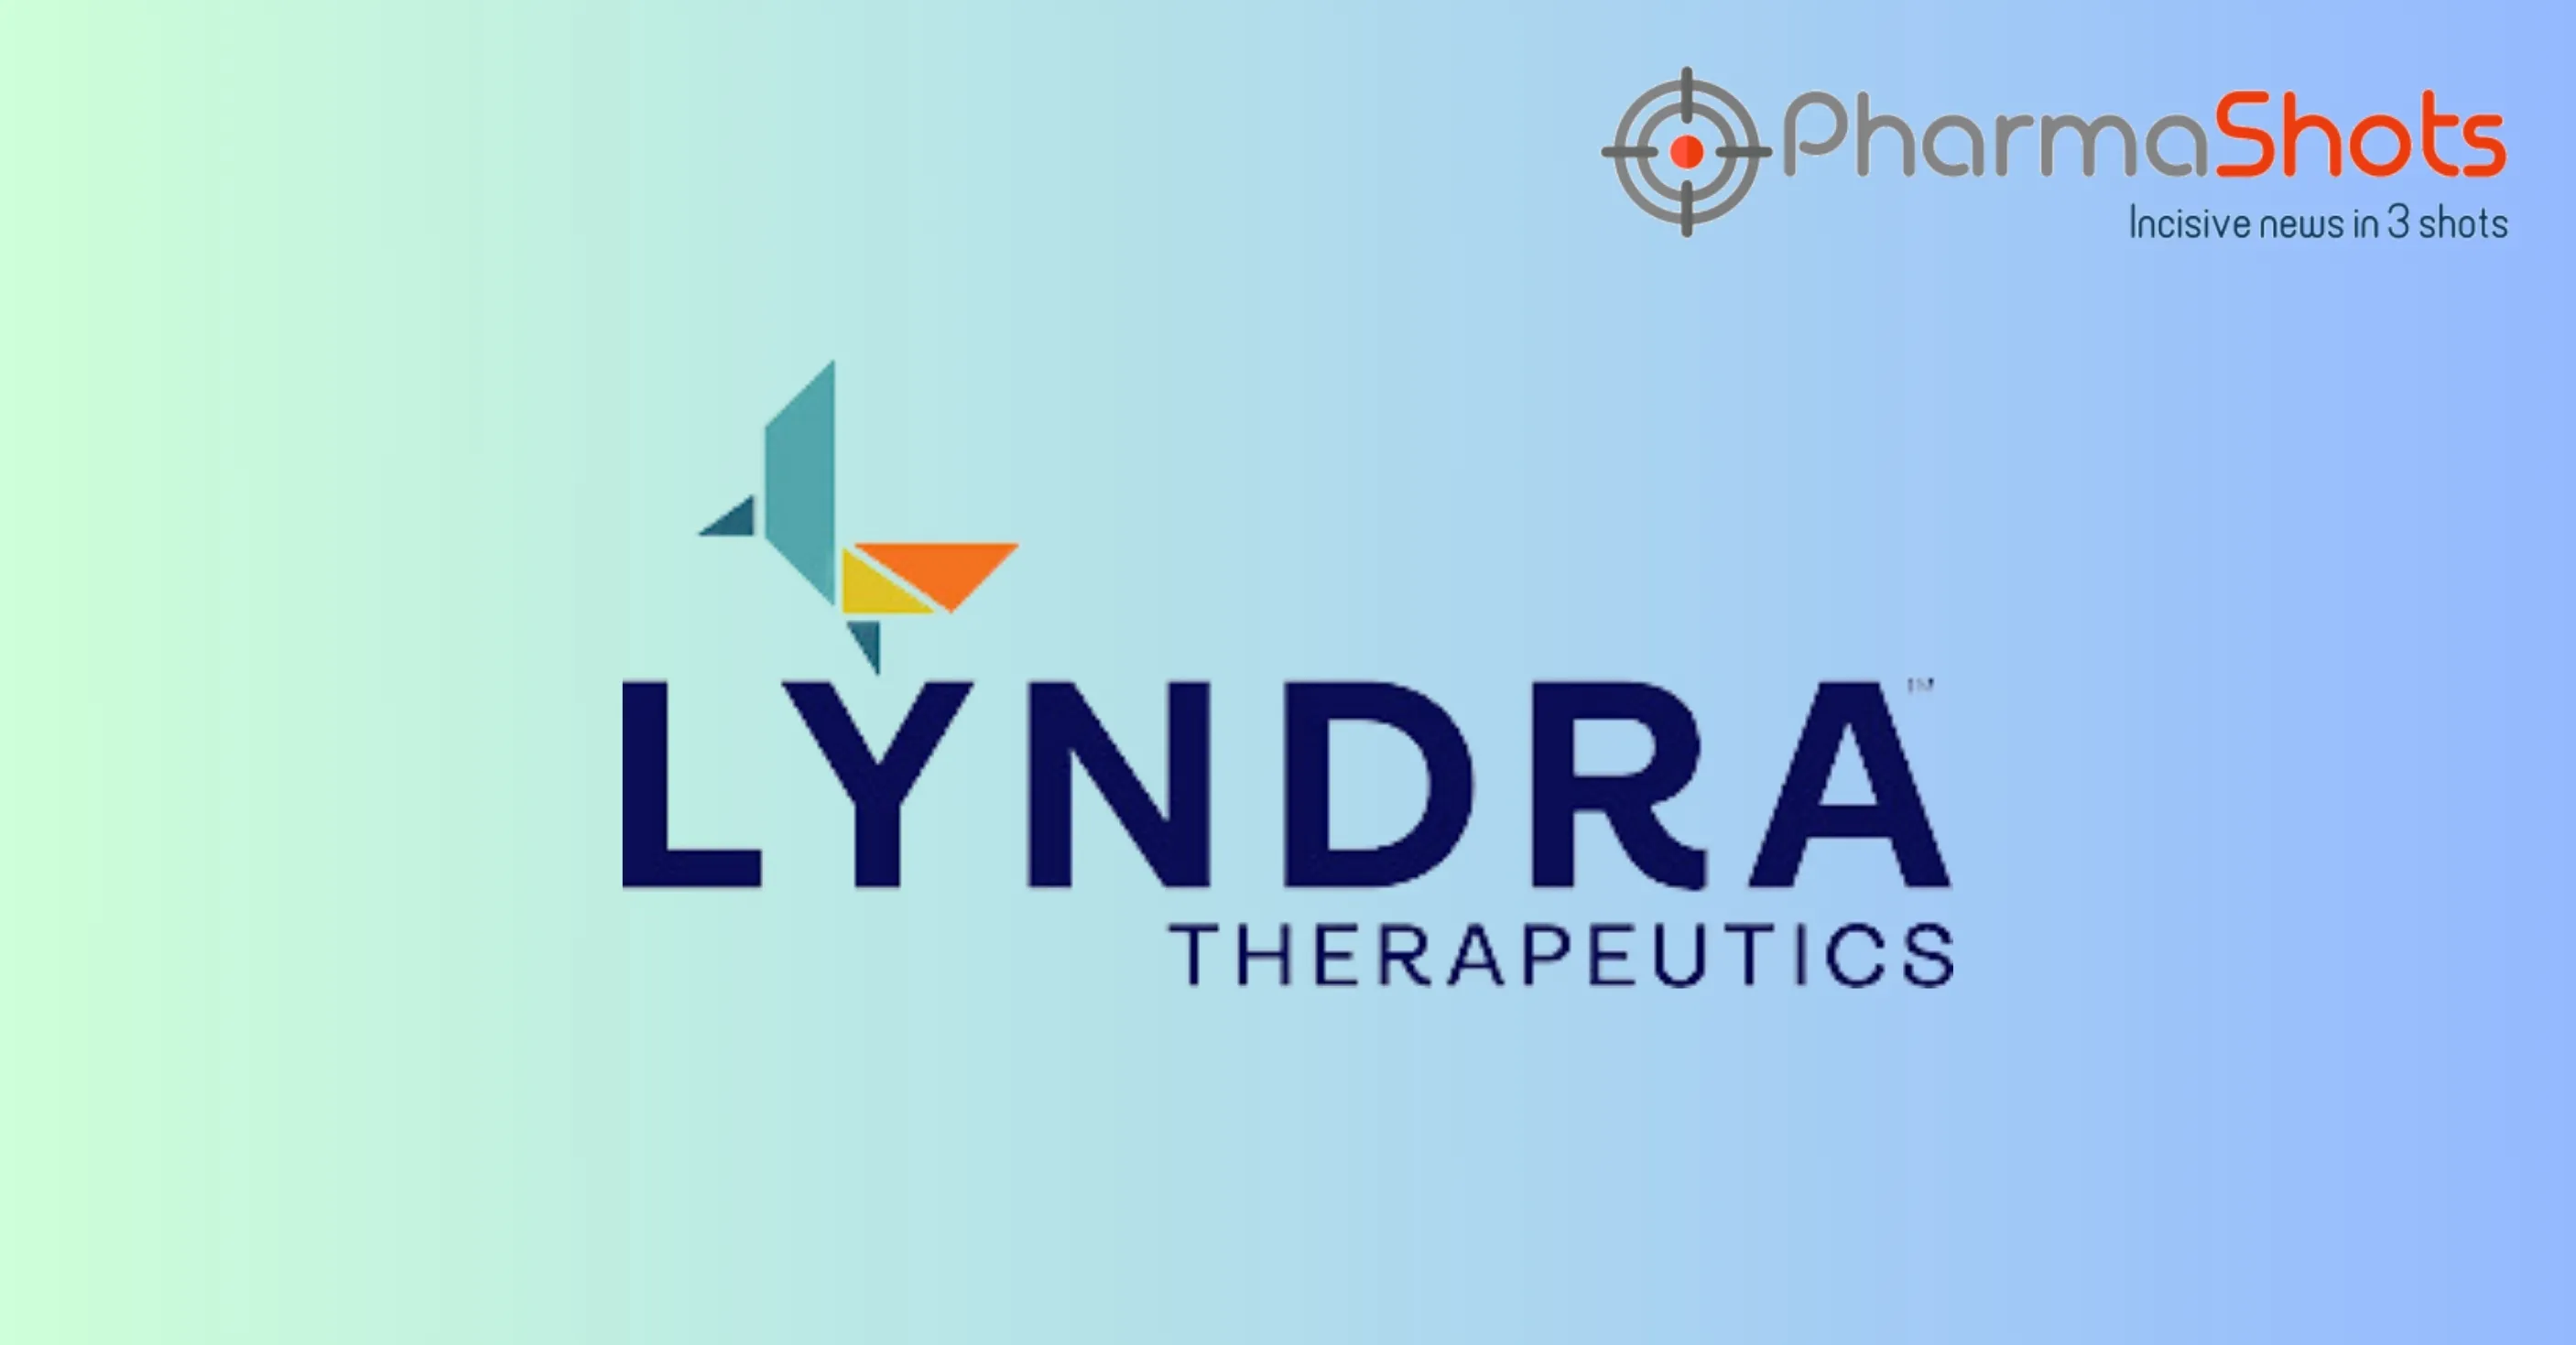 Lyndra Therapeutics Reports Results for Risperidone (LYN-005) in P-III Trial for the Treatment of Schizophrenia